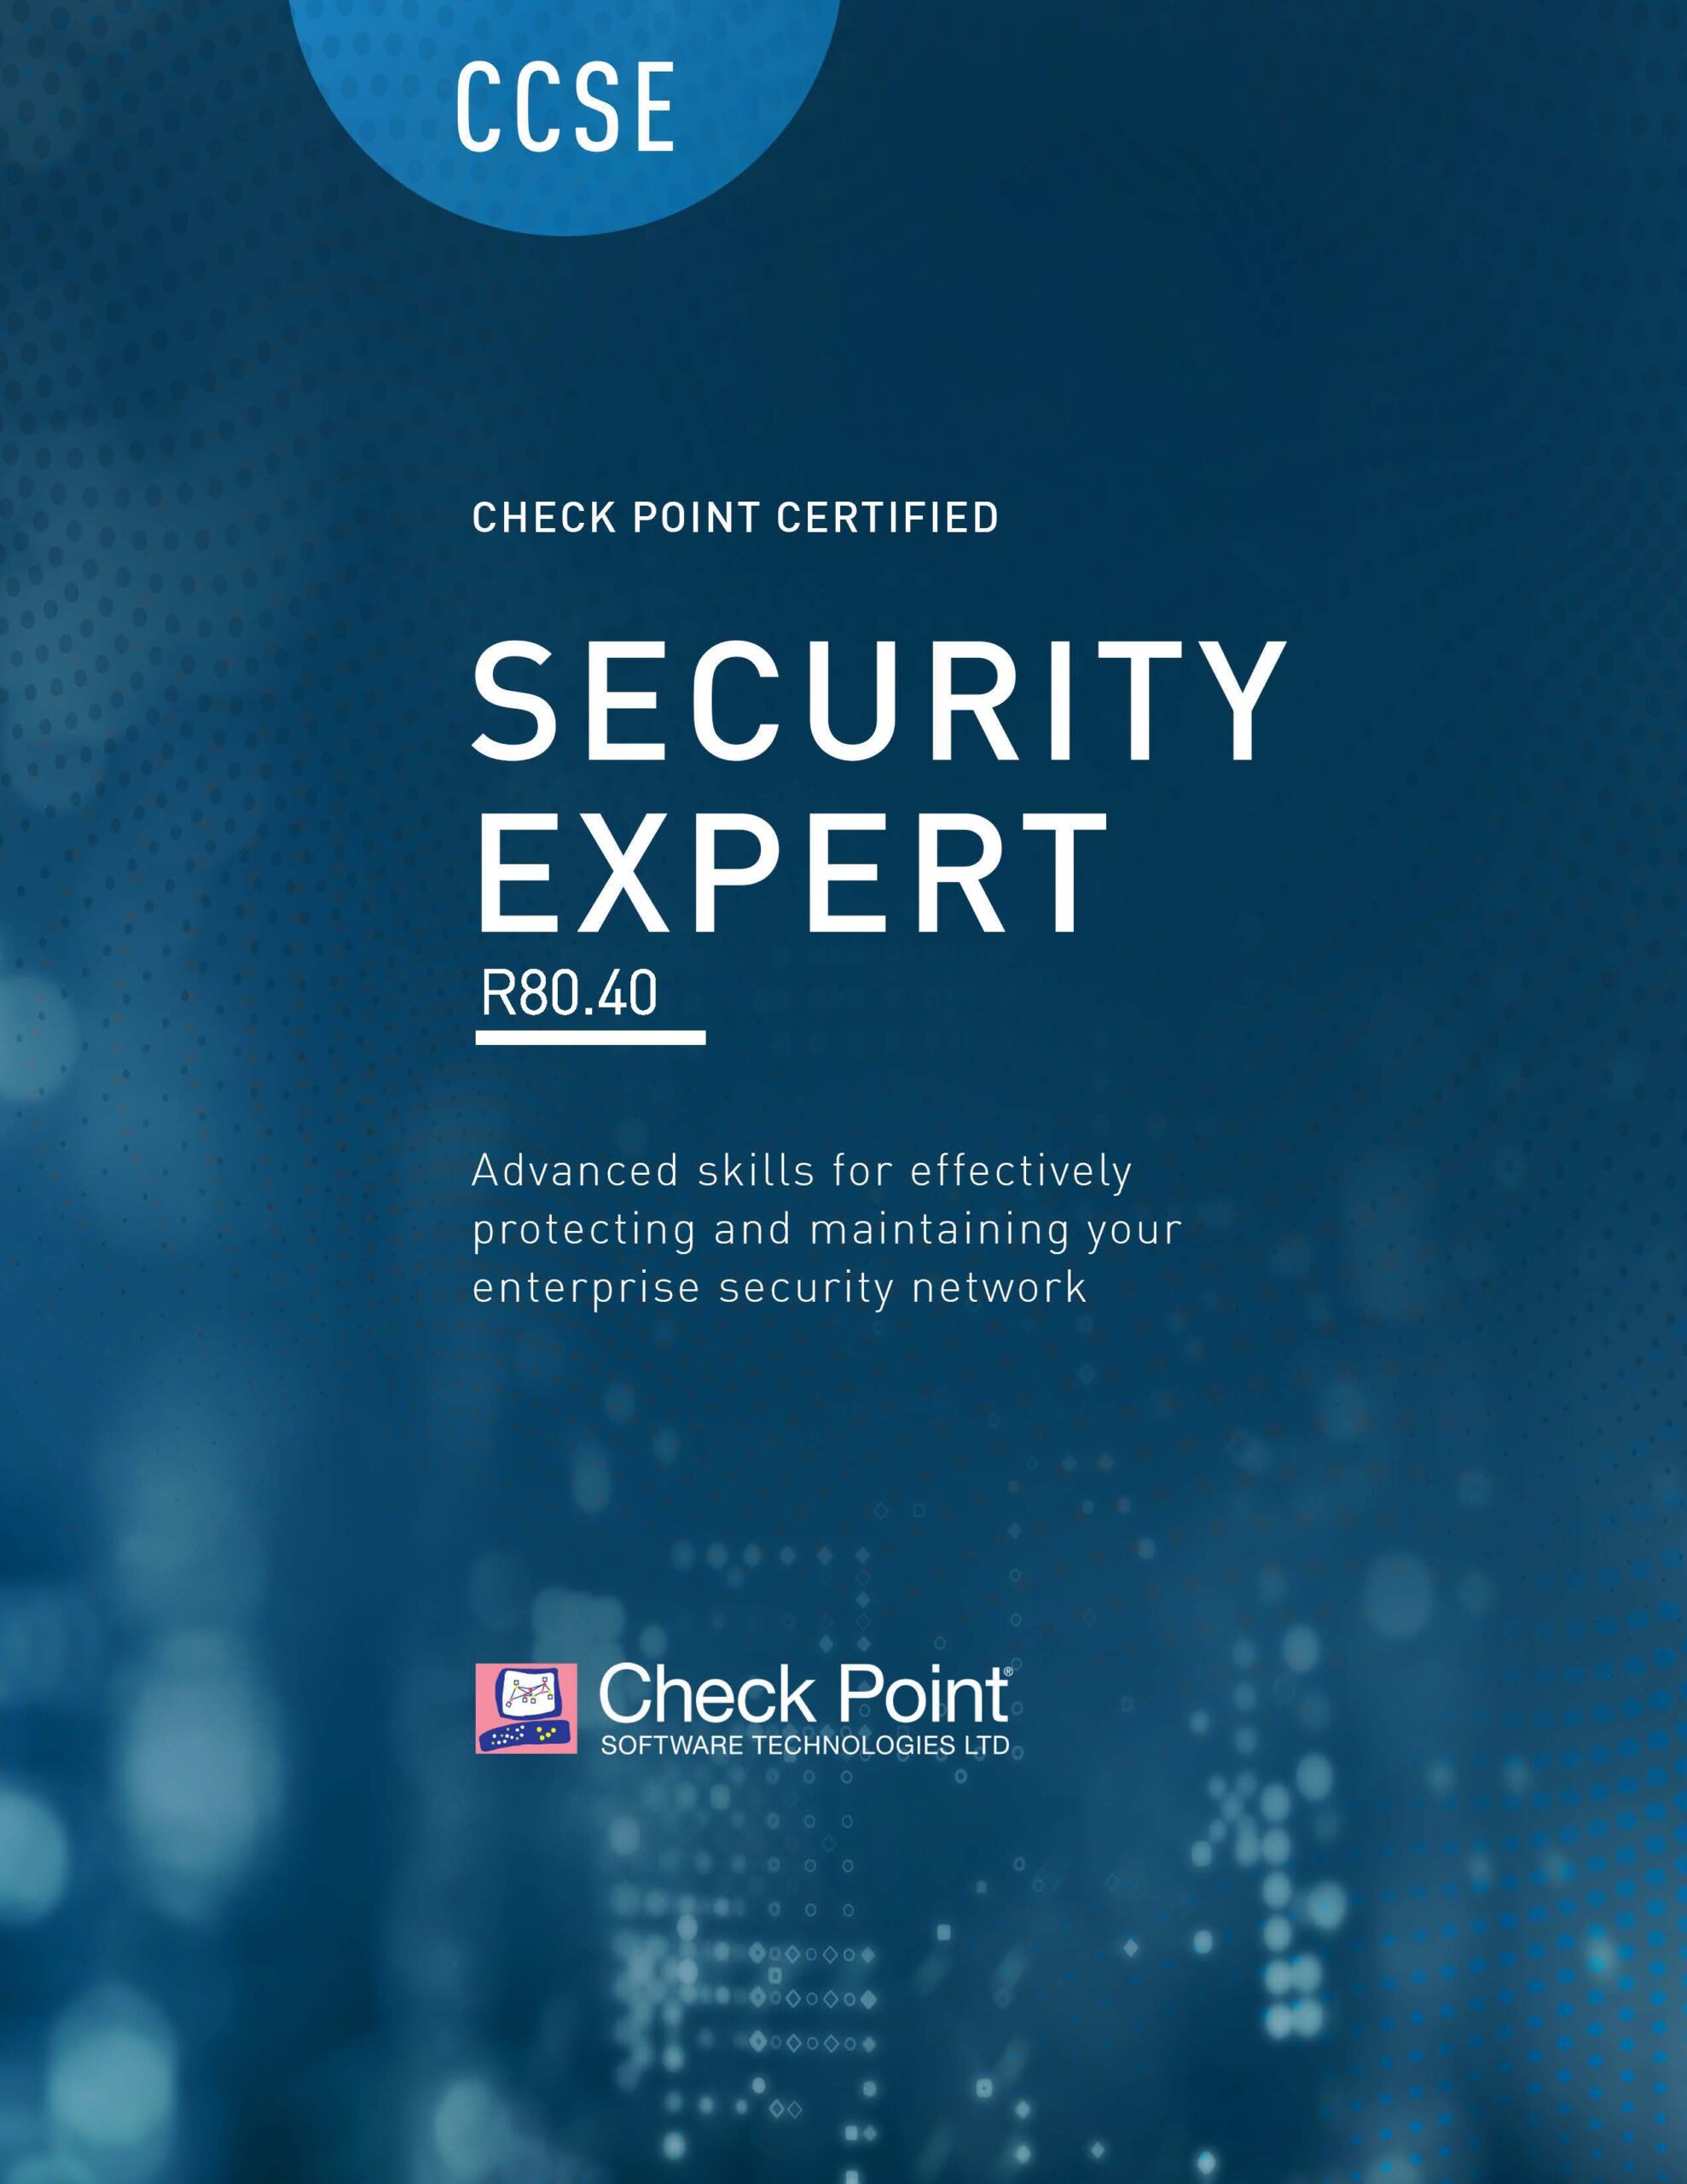 CCSE – Check Point Certified Security Expert (CCSE)